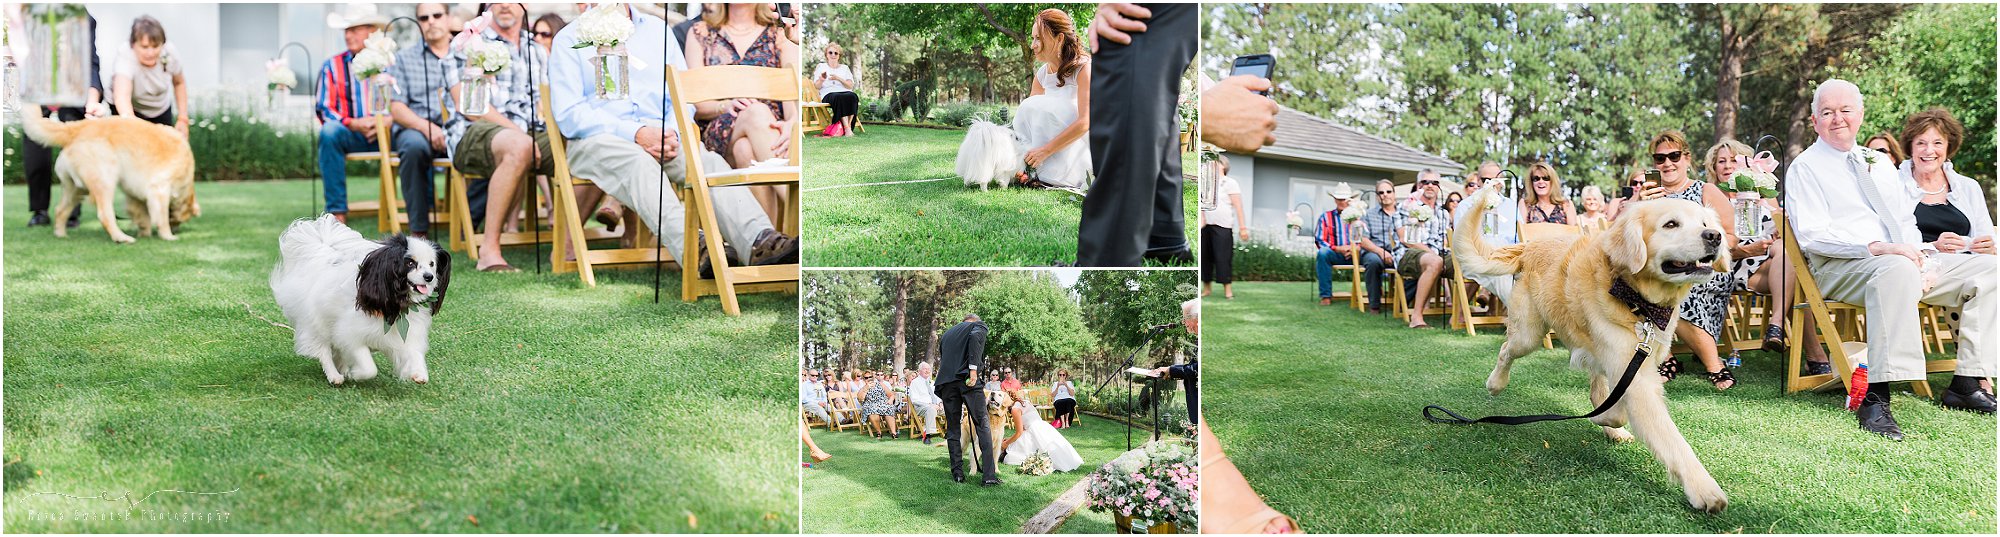 The cutest dog flower girl and ring bearer for this outdoor garden wedding in Sisters, Oregon. | Erica Swantek Photography